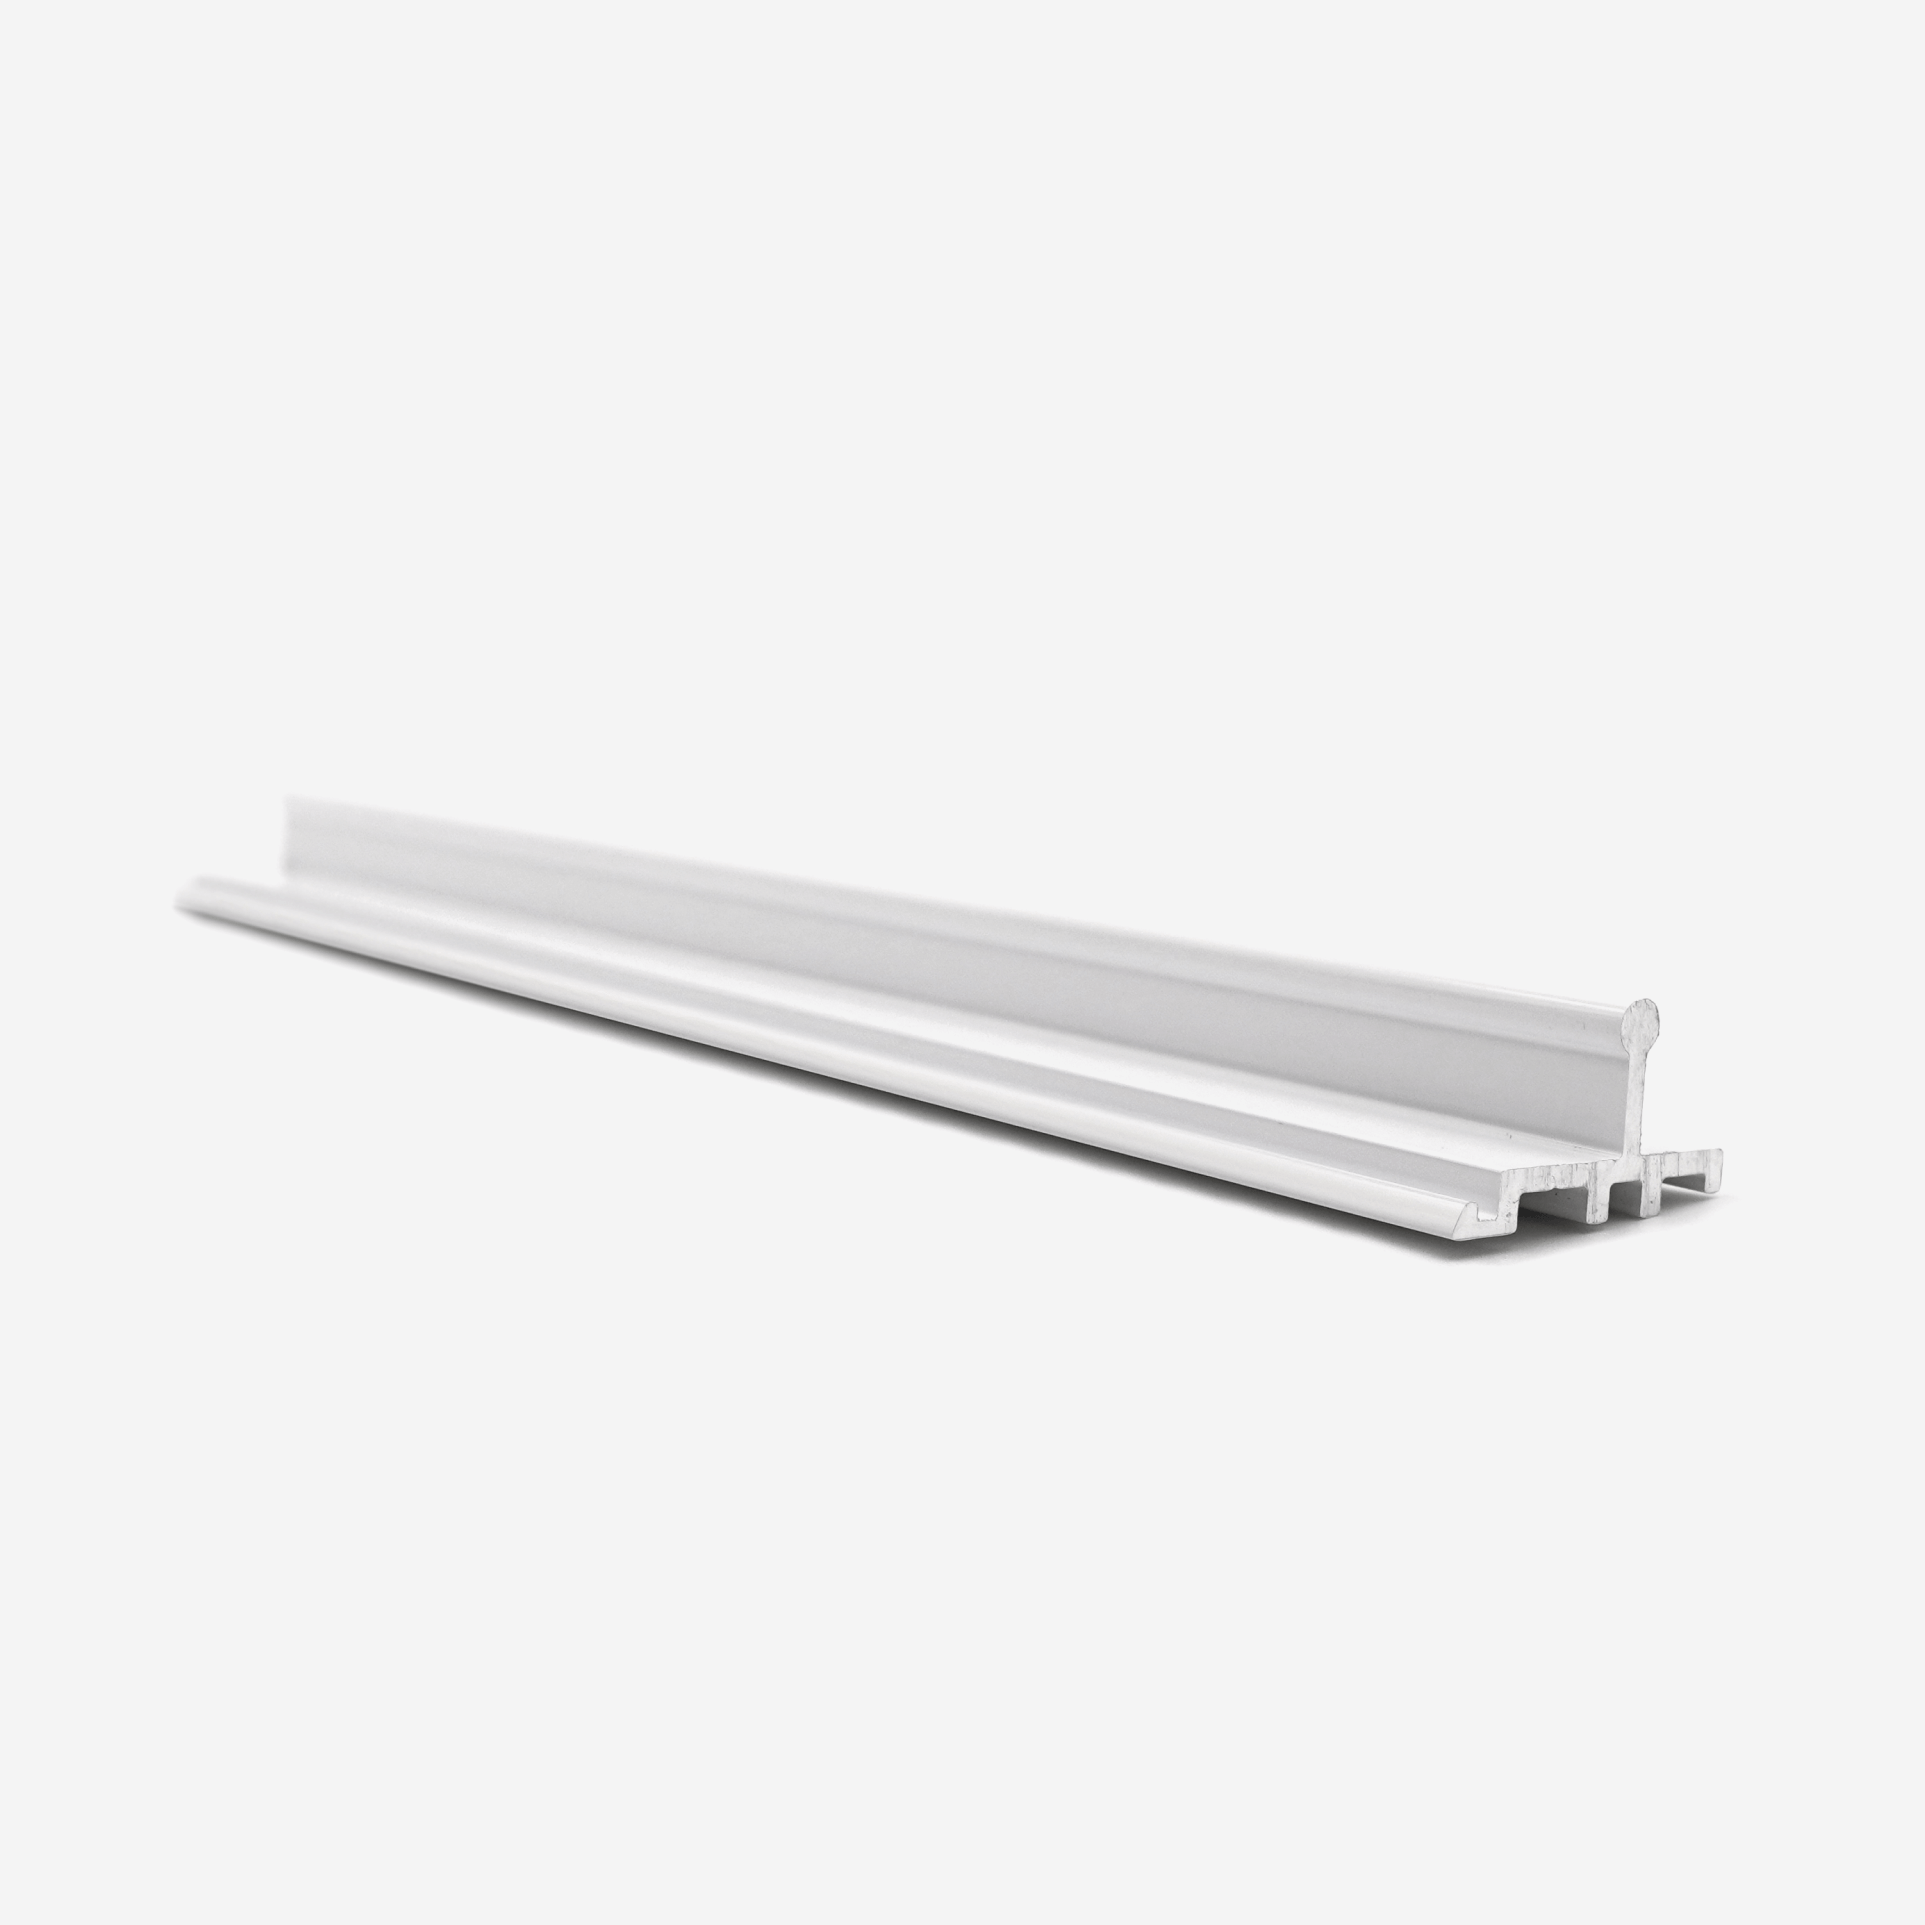 SGL-1116 Bottom Guide Extension 240" Stock Length - Satin anodized